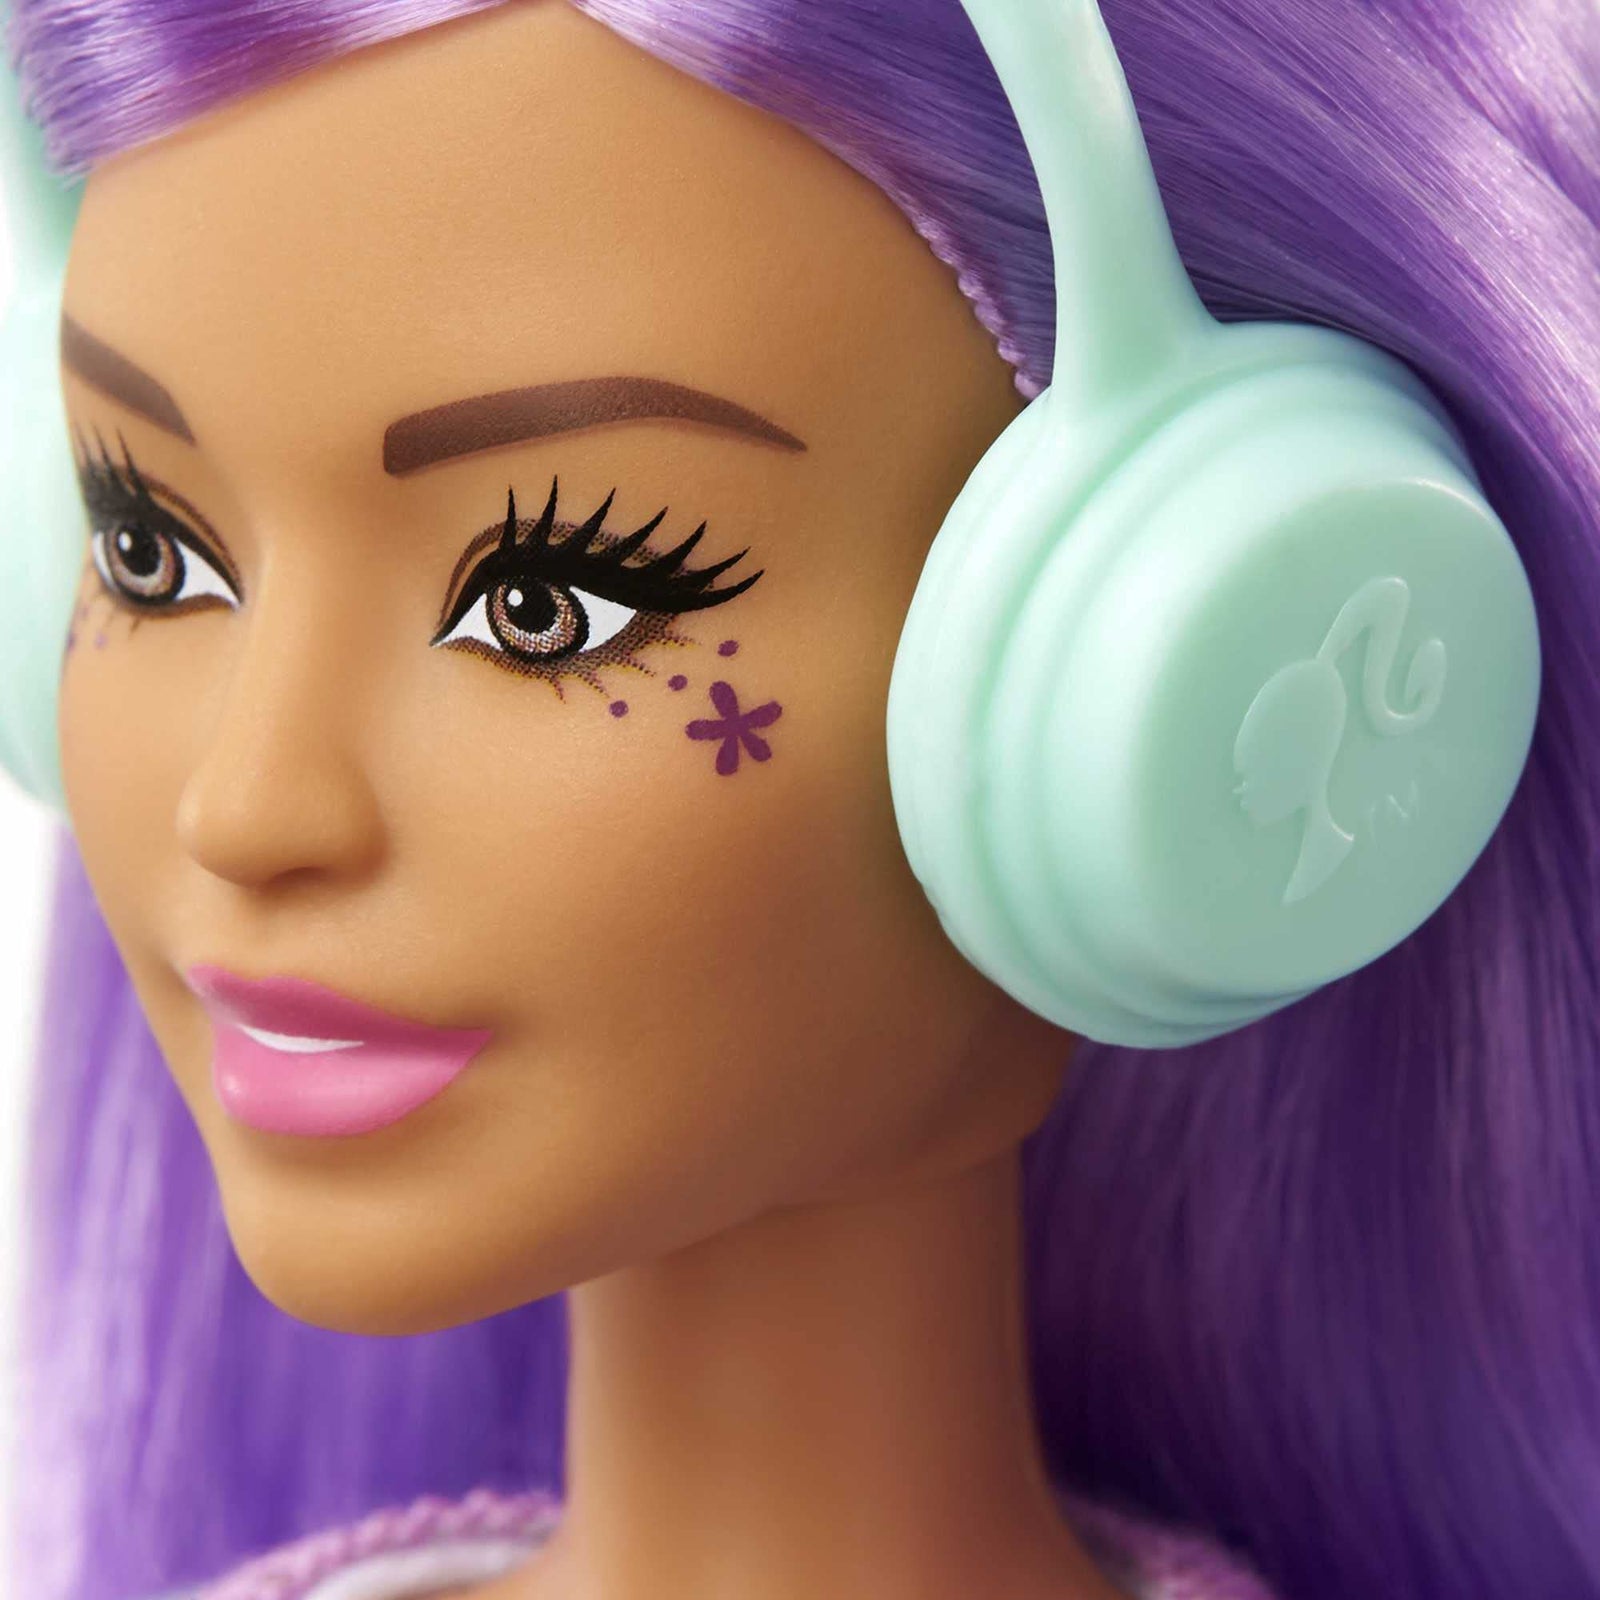 Barbie Career of The Year Music Producer Doll (12-in), Colorful Purple Hair, Trendy Tee, Jacket & Jeans Plus Sound Mixing Board, Computer & Headphone Accessories, Great Toy Gift